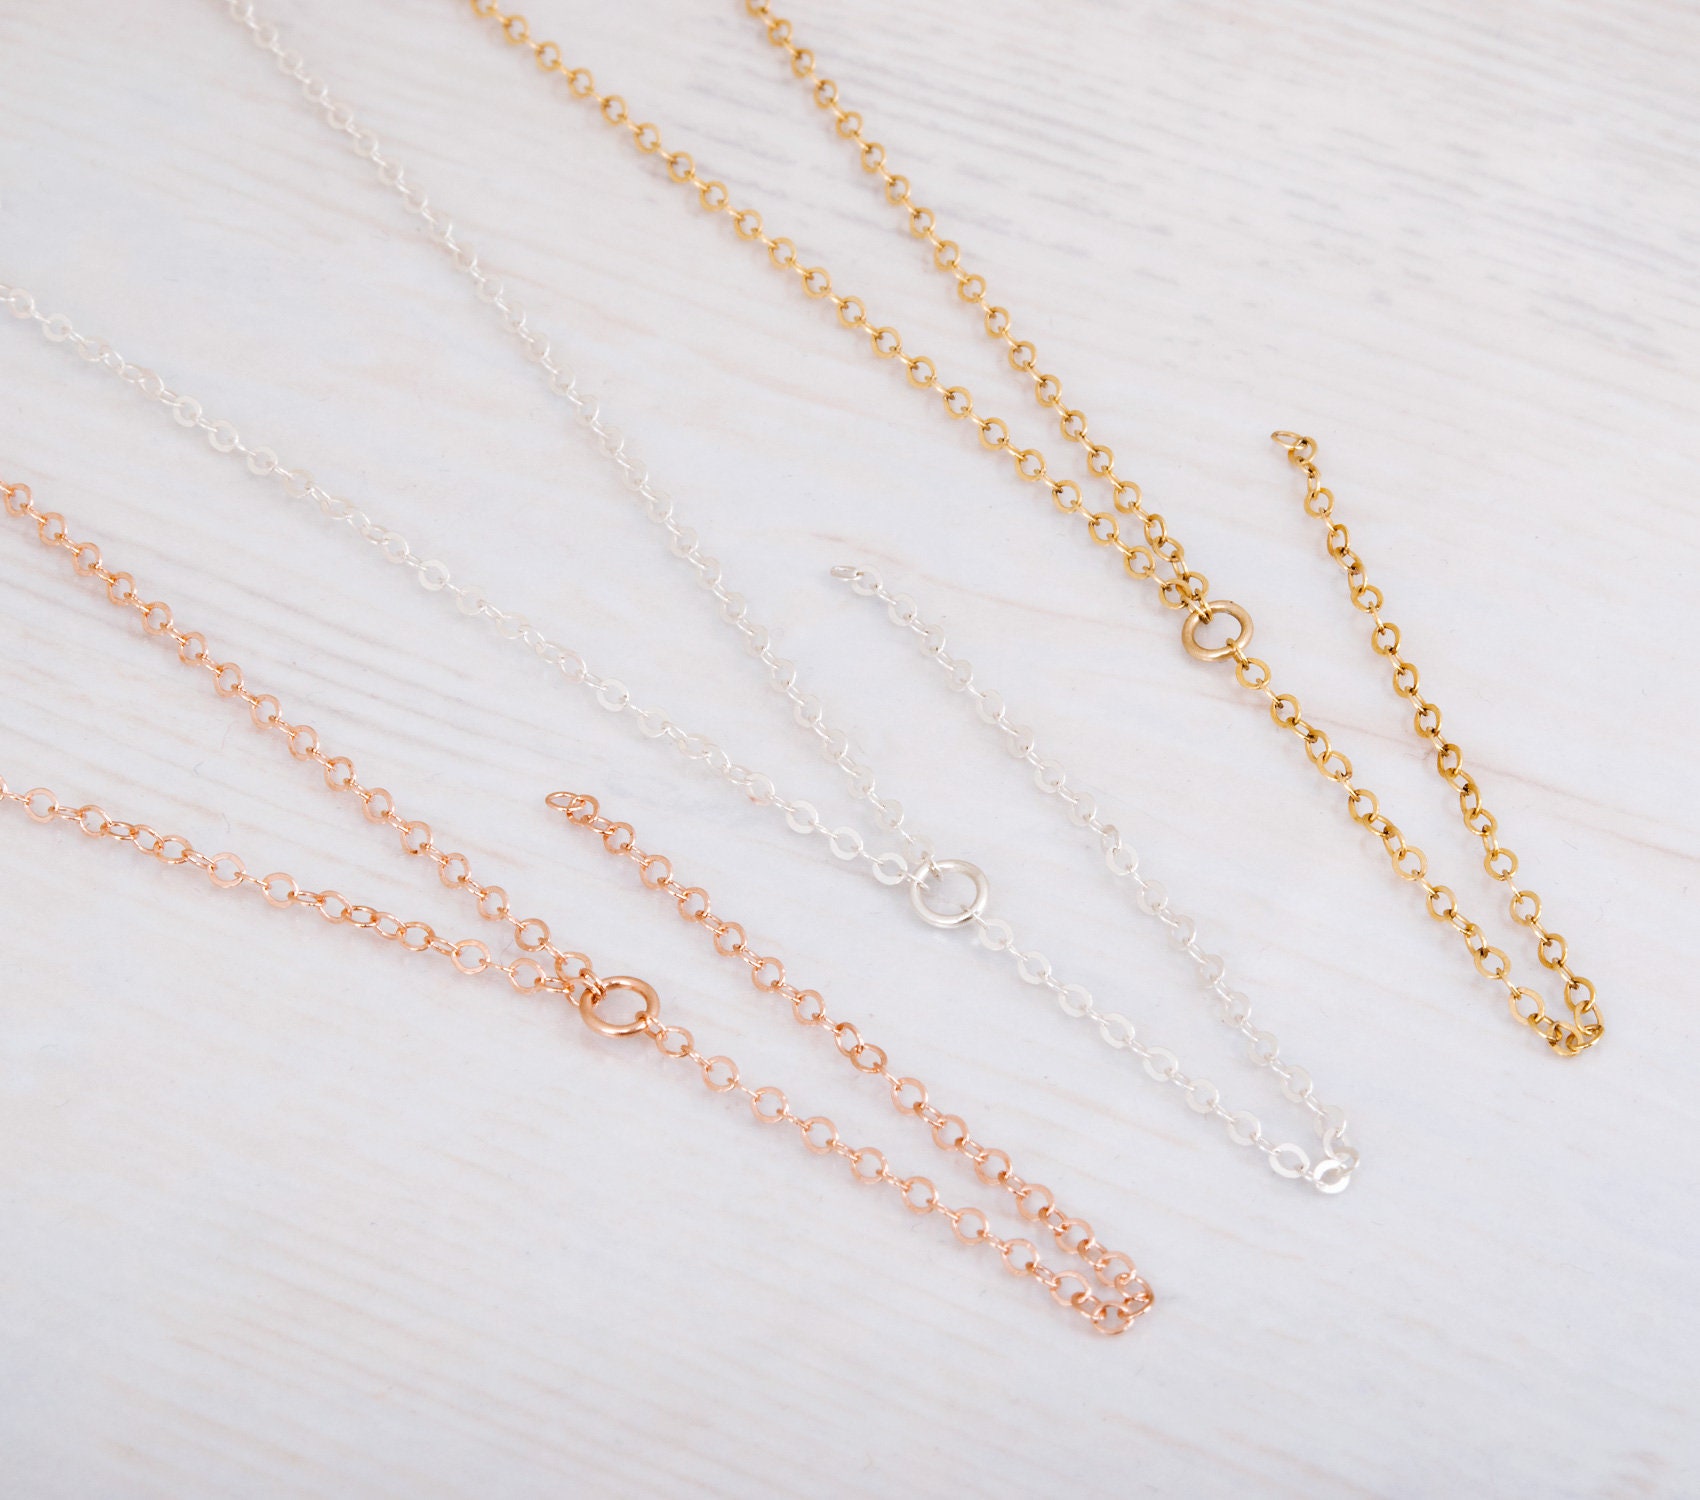 Sterling Silver Choker Necklace for Women, Chain Choker Silver Lariat Necklace Gold, Modern Dainty Double Layered Chain Set Rose Gold Gift